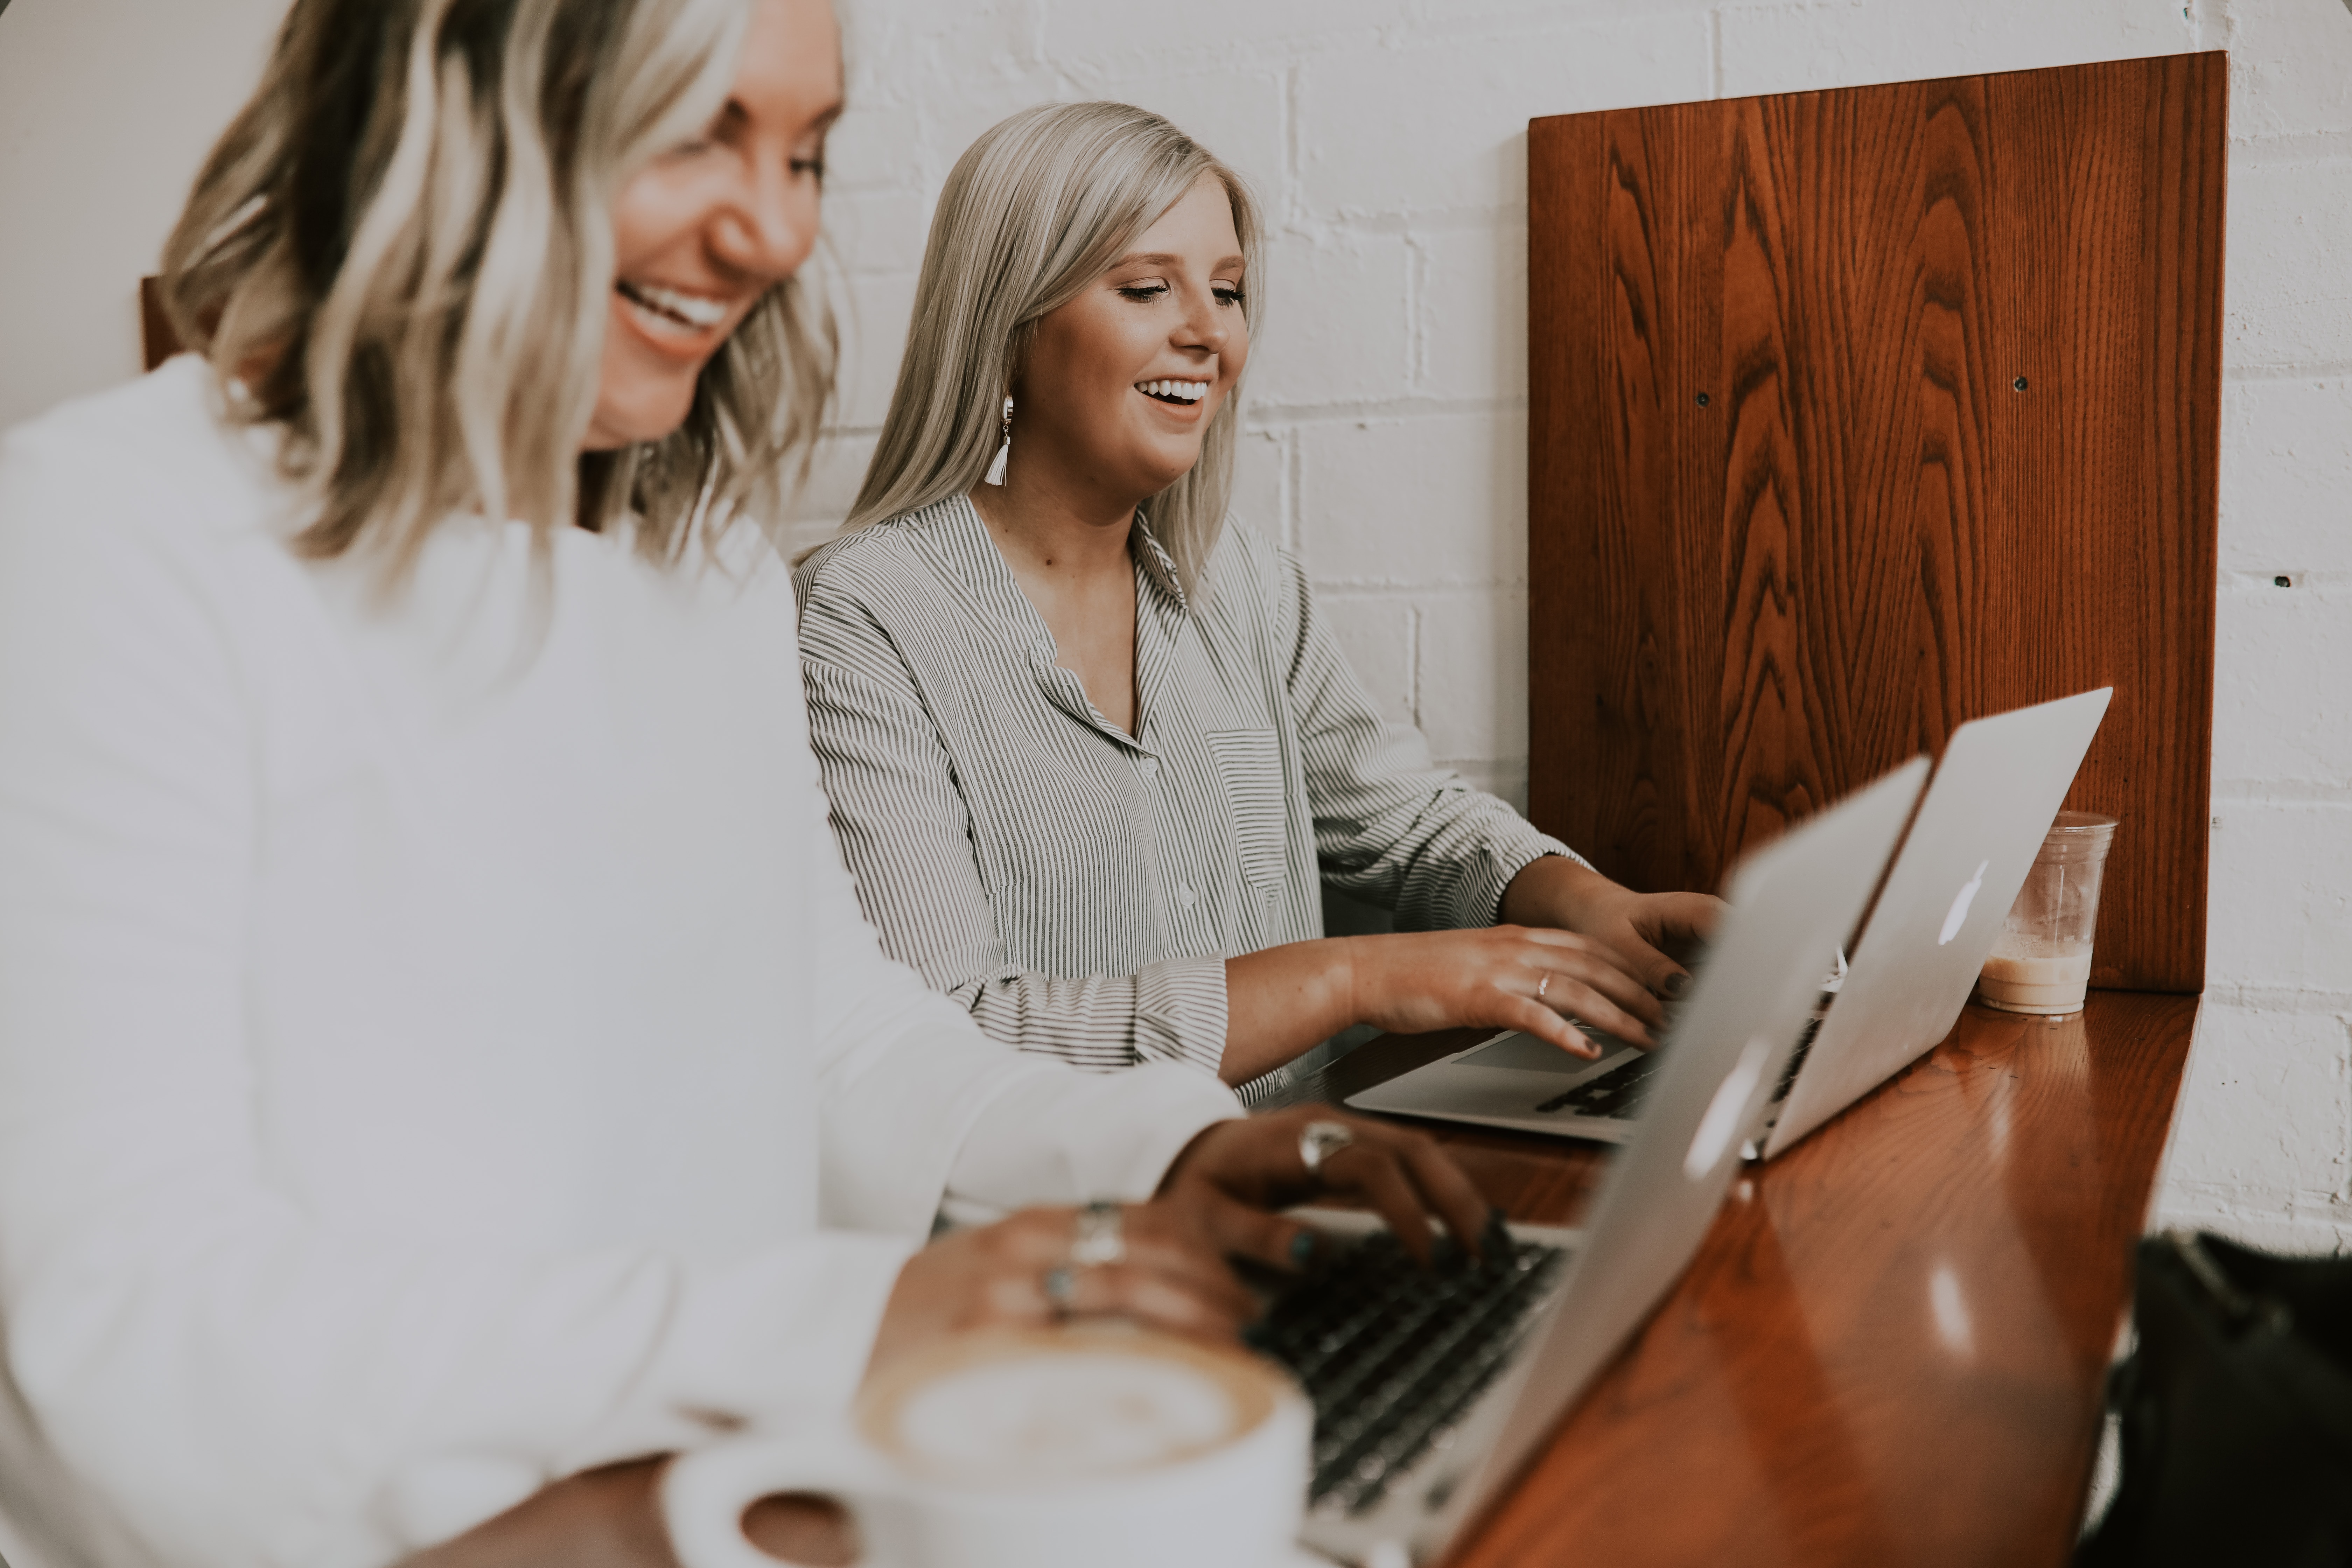 Two women smiling at computers